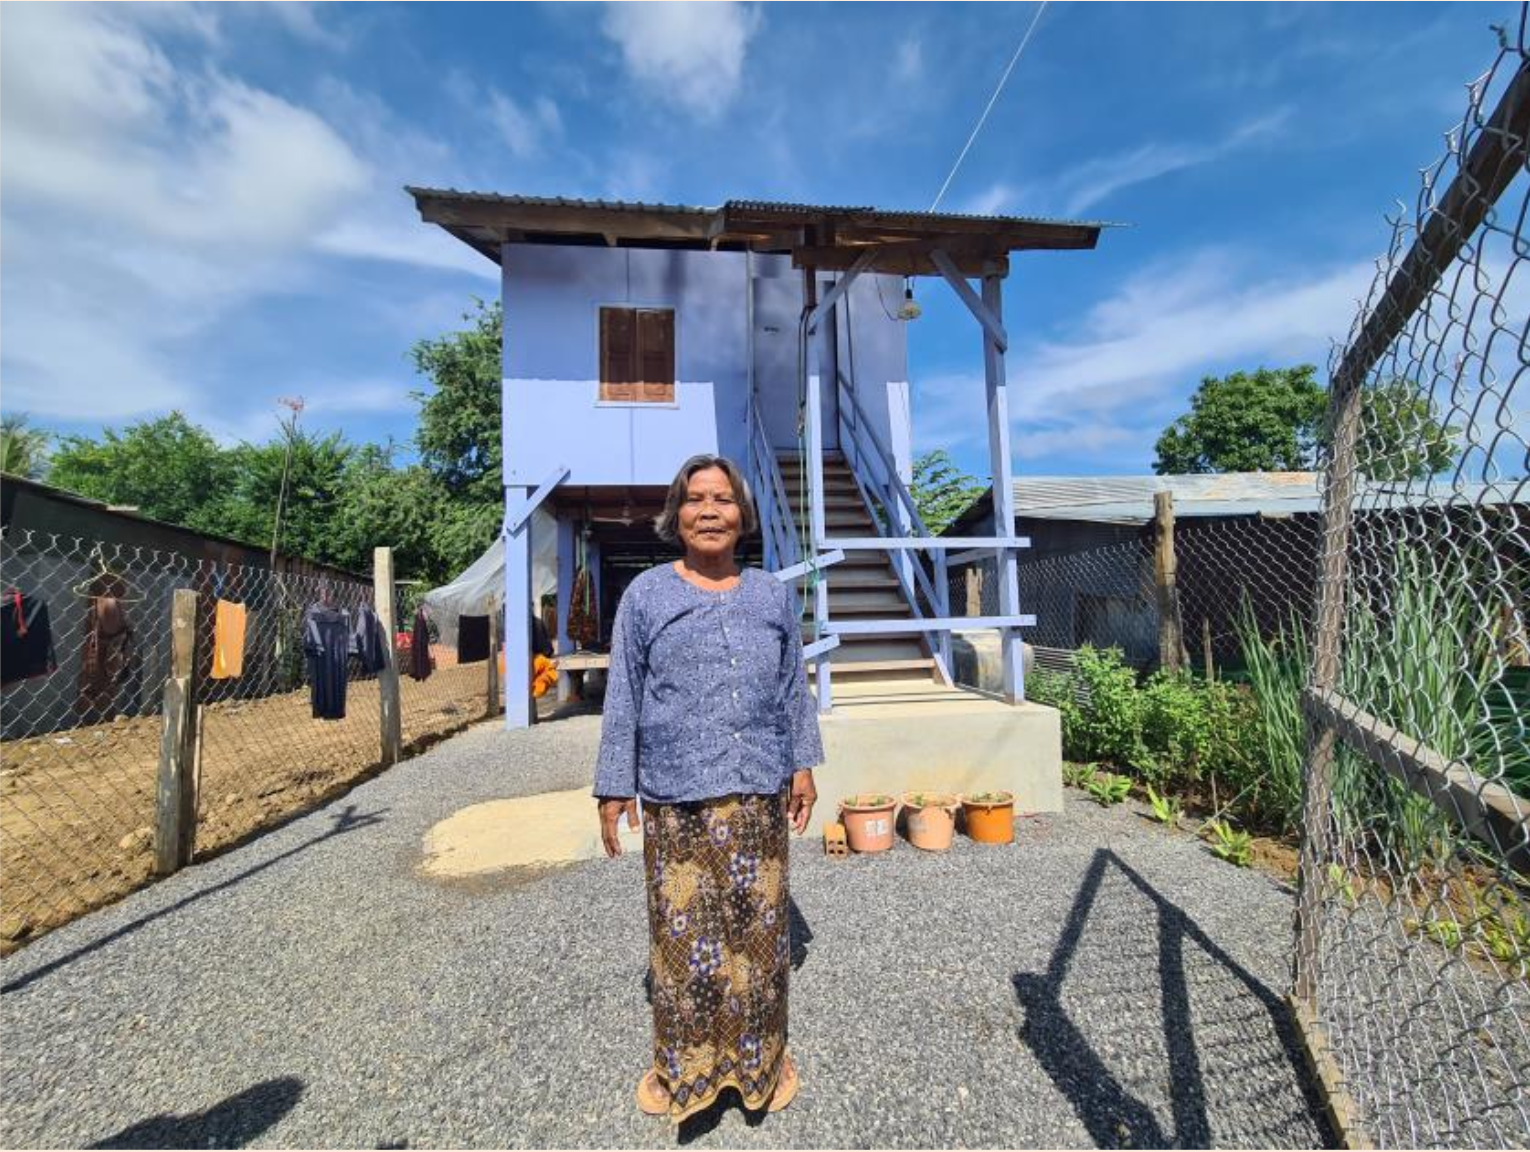 Yip Say, an elderly Cambodian woman, in traditional dress, stands proudly in her gravel driveway, outside her new home. The home is painted blue which matches the sky behind it.